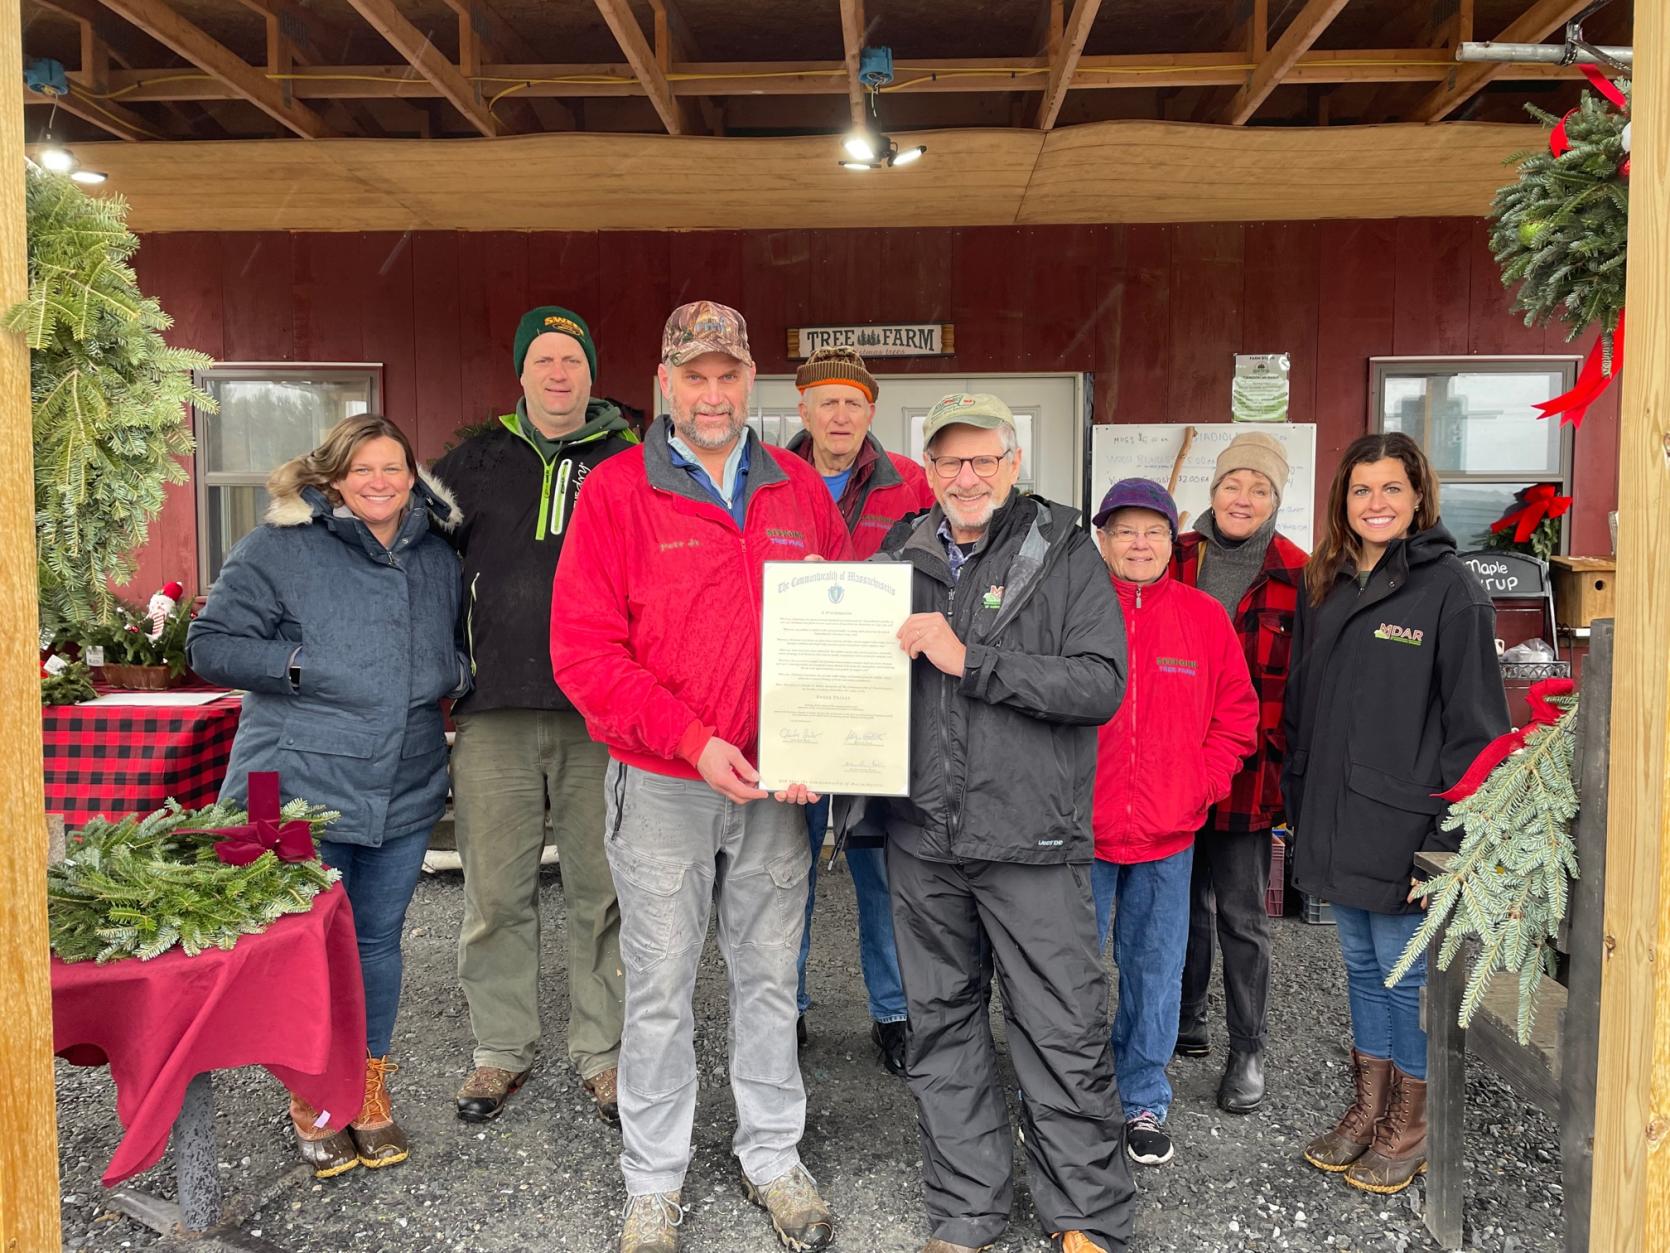 MDAR Commissioner John Lebeaux and Deputy Commissioner Ashley Randle visited Seekonk Tree Farm in Great Barrington to celebrate Friday, November 26, 2021, as “Green Friday” in honor of the Massachusetts Christmas tree industry.